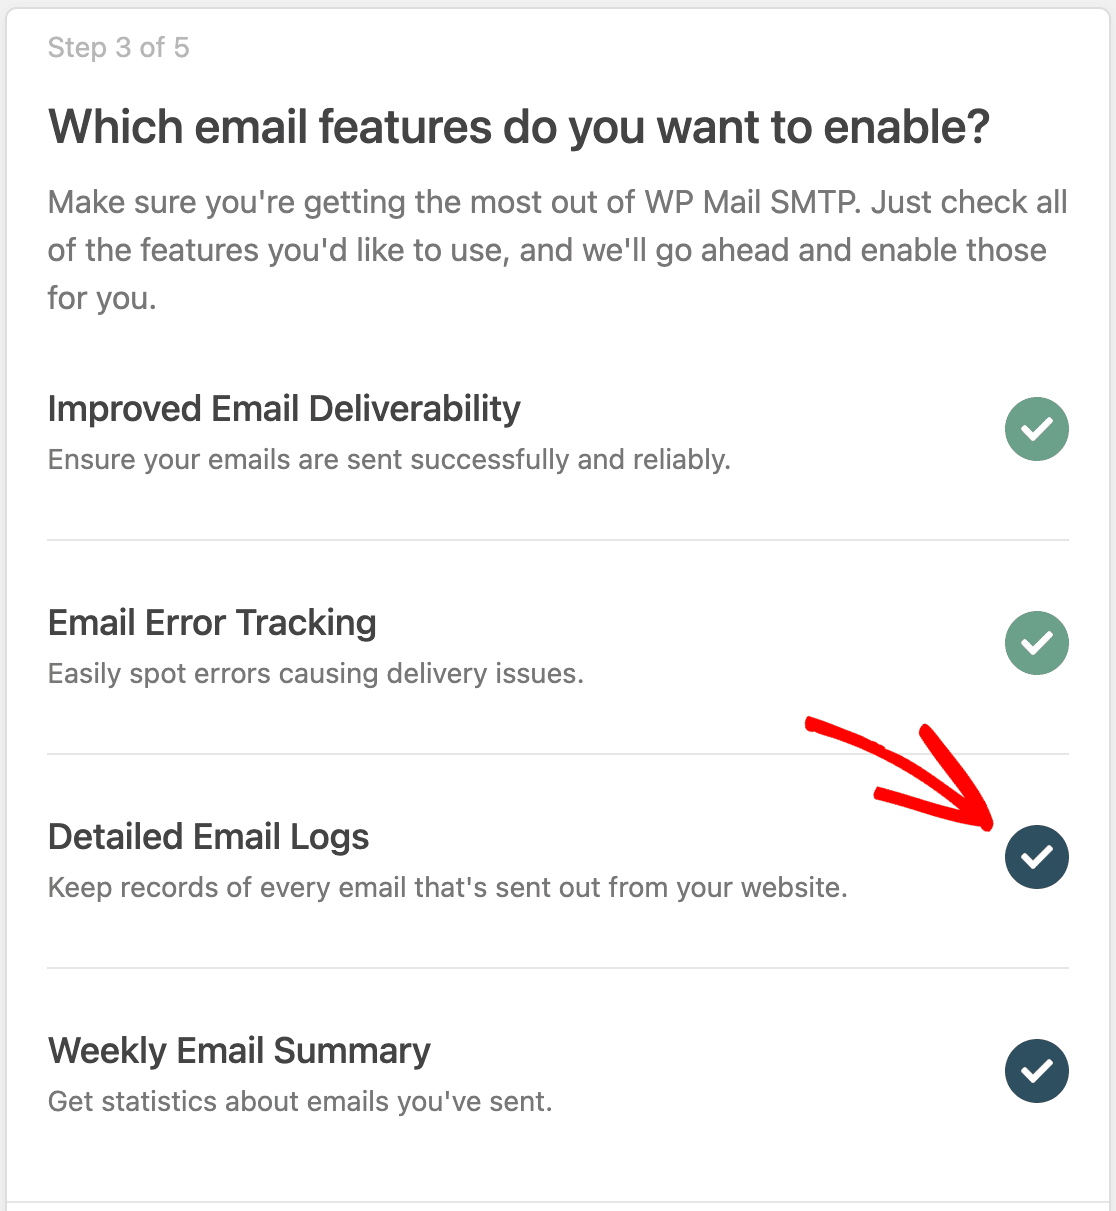 Enabling detailed email logs for WP Mail SMTP